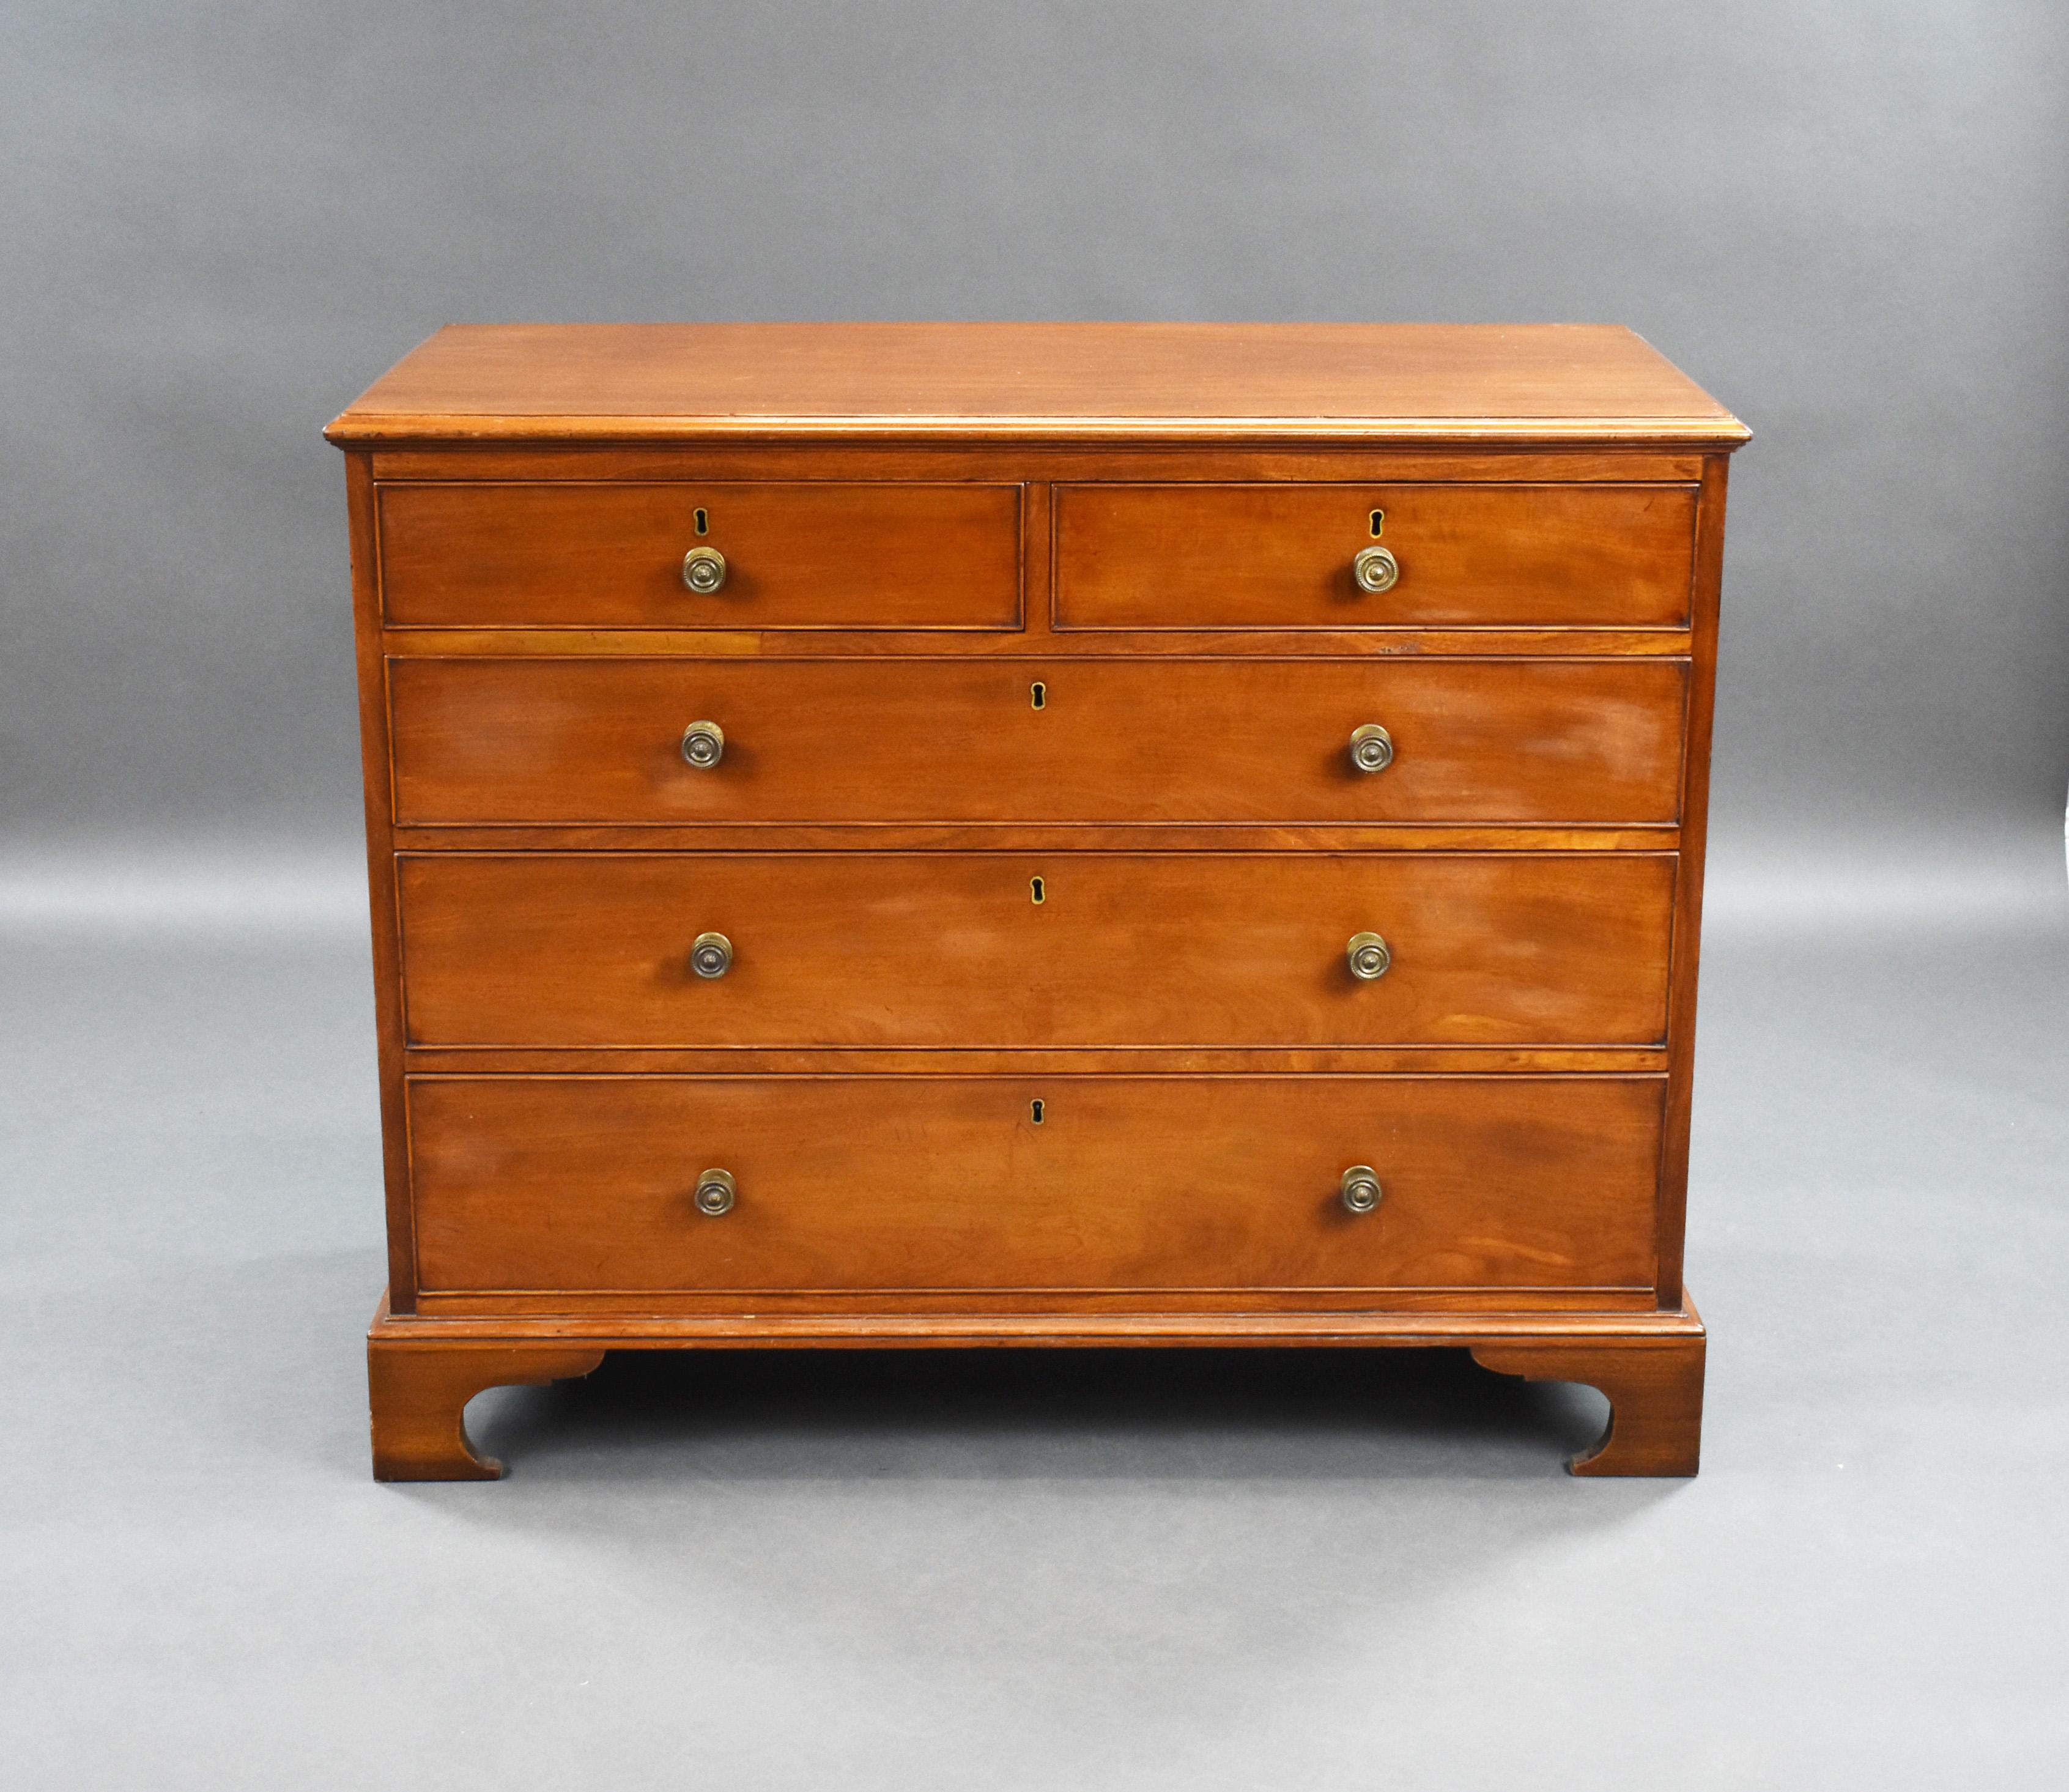 For sale is a good quality George III mahogany chest of drawers, having an arrangement of five drawers, each with brass handles. The chest stands on bracket feet and is in very good condition for its age. 

Measures: Width: 109cm Depth: 52cm